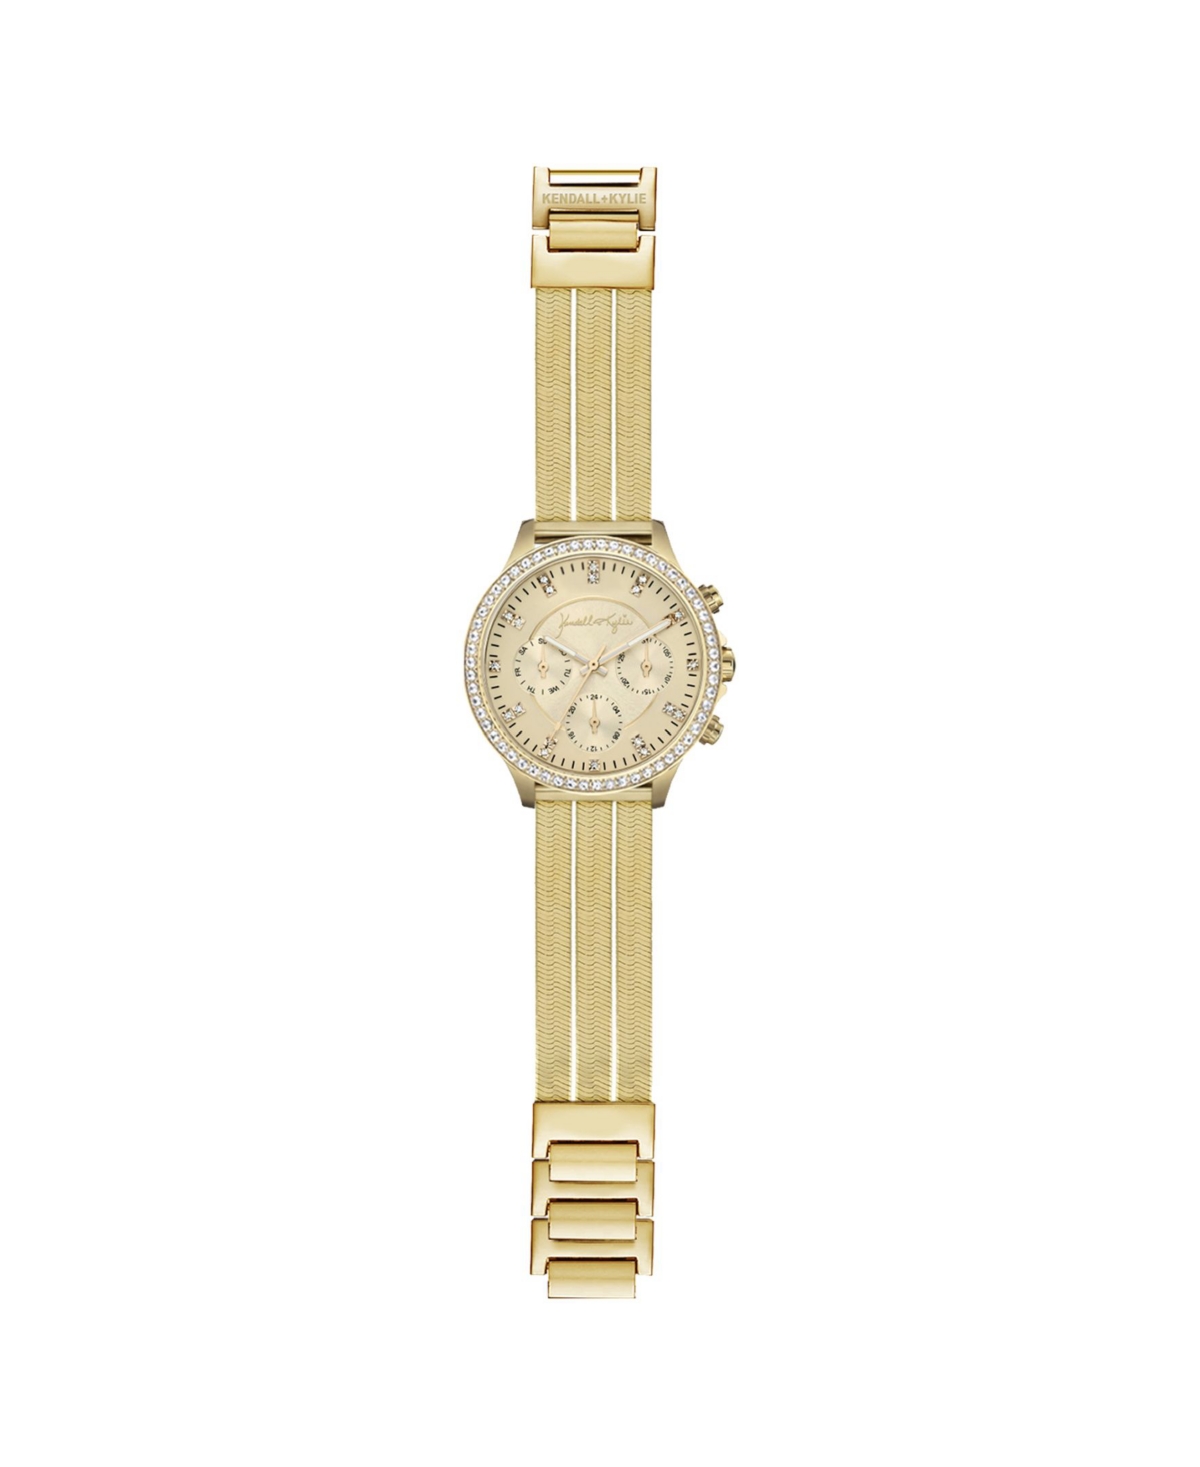 iTouch Women's Kendall + Kylie Gold-Tone Metal Bracelet Watch - Gold